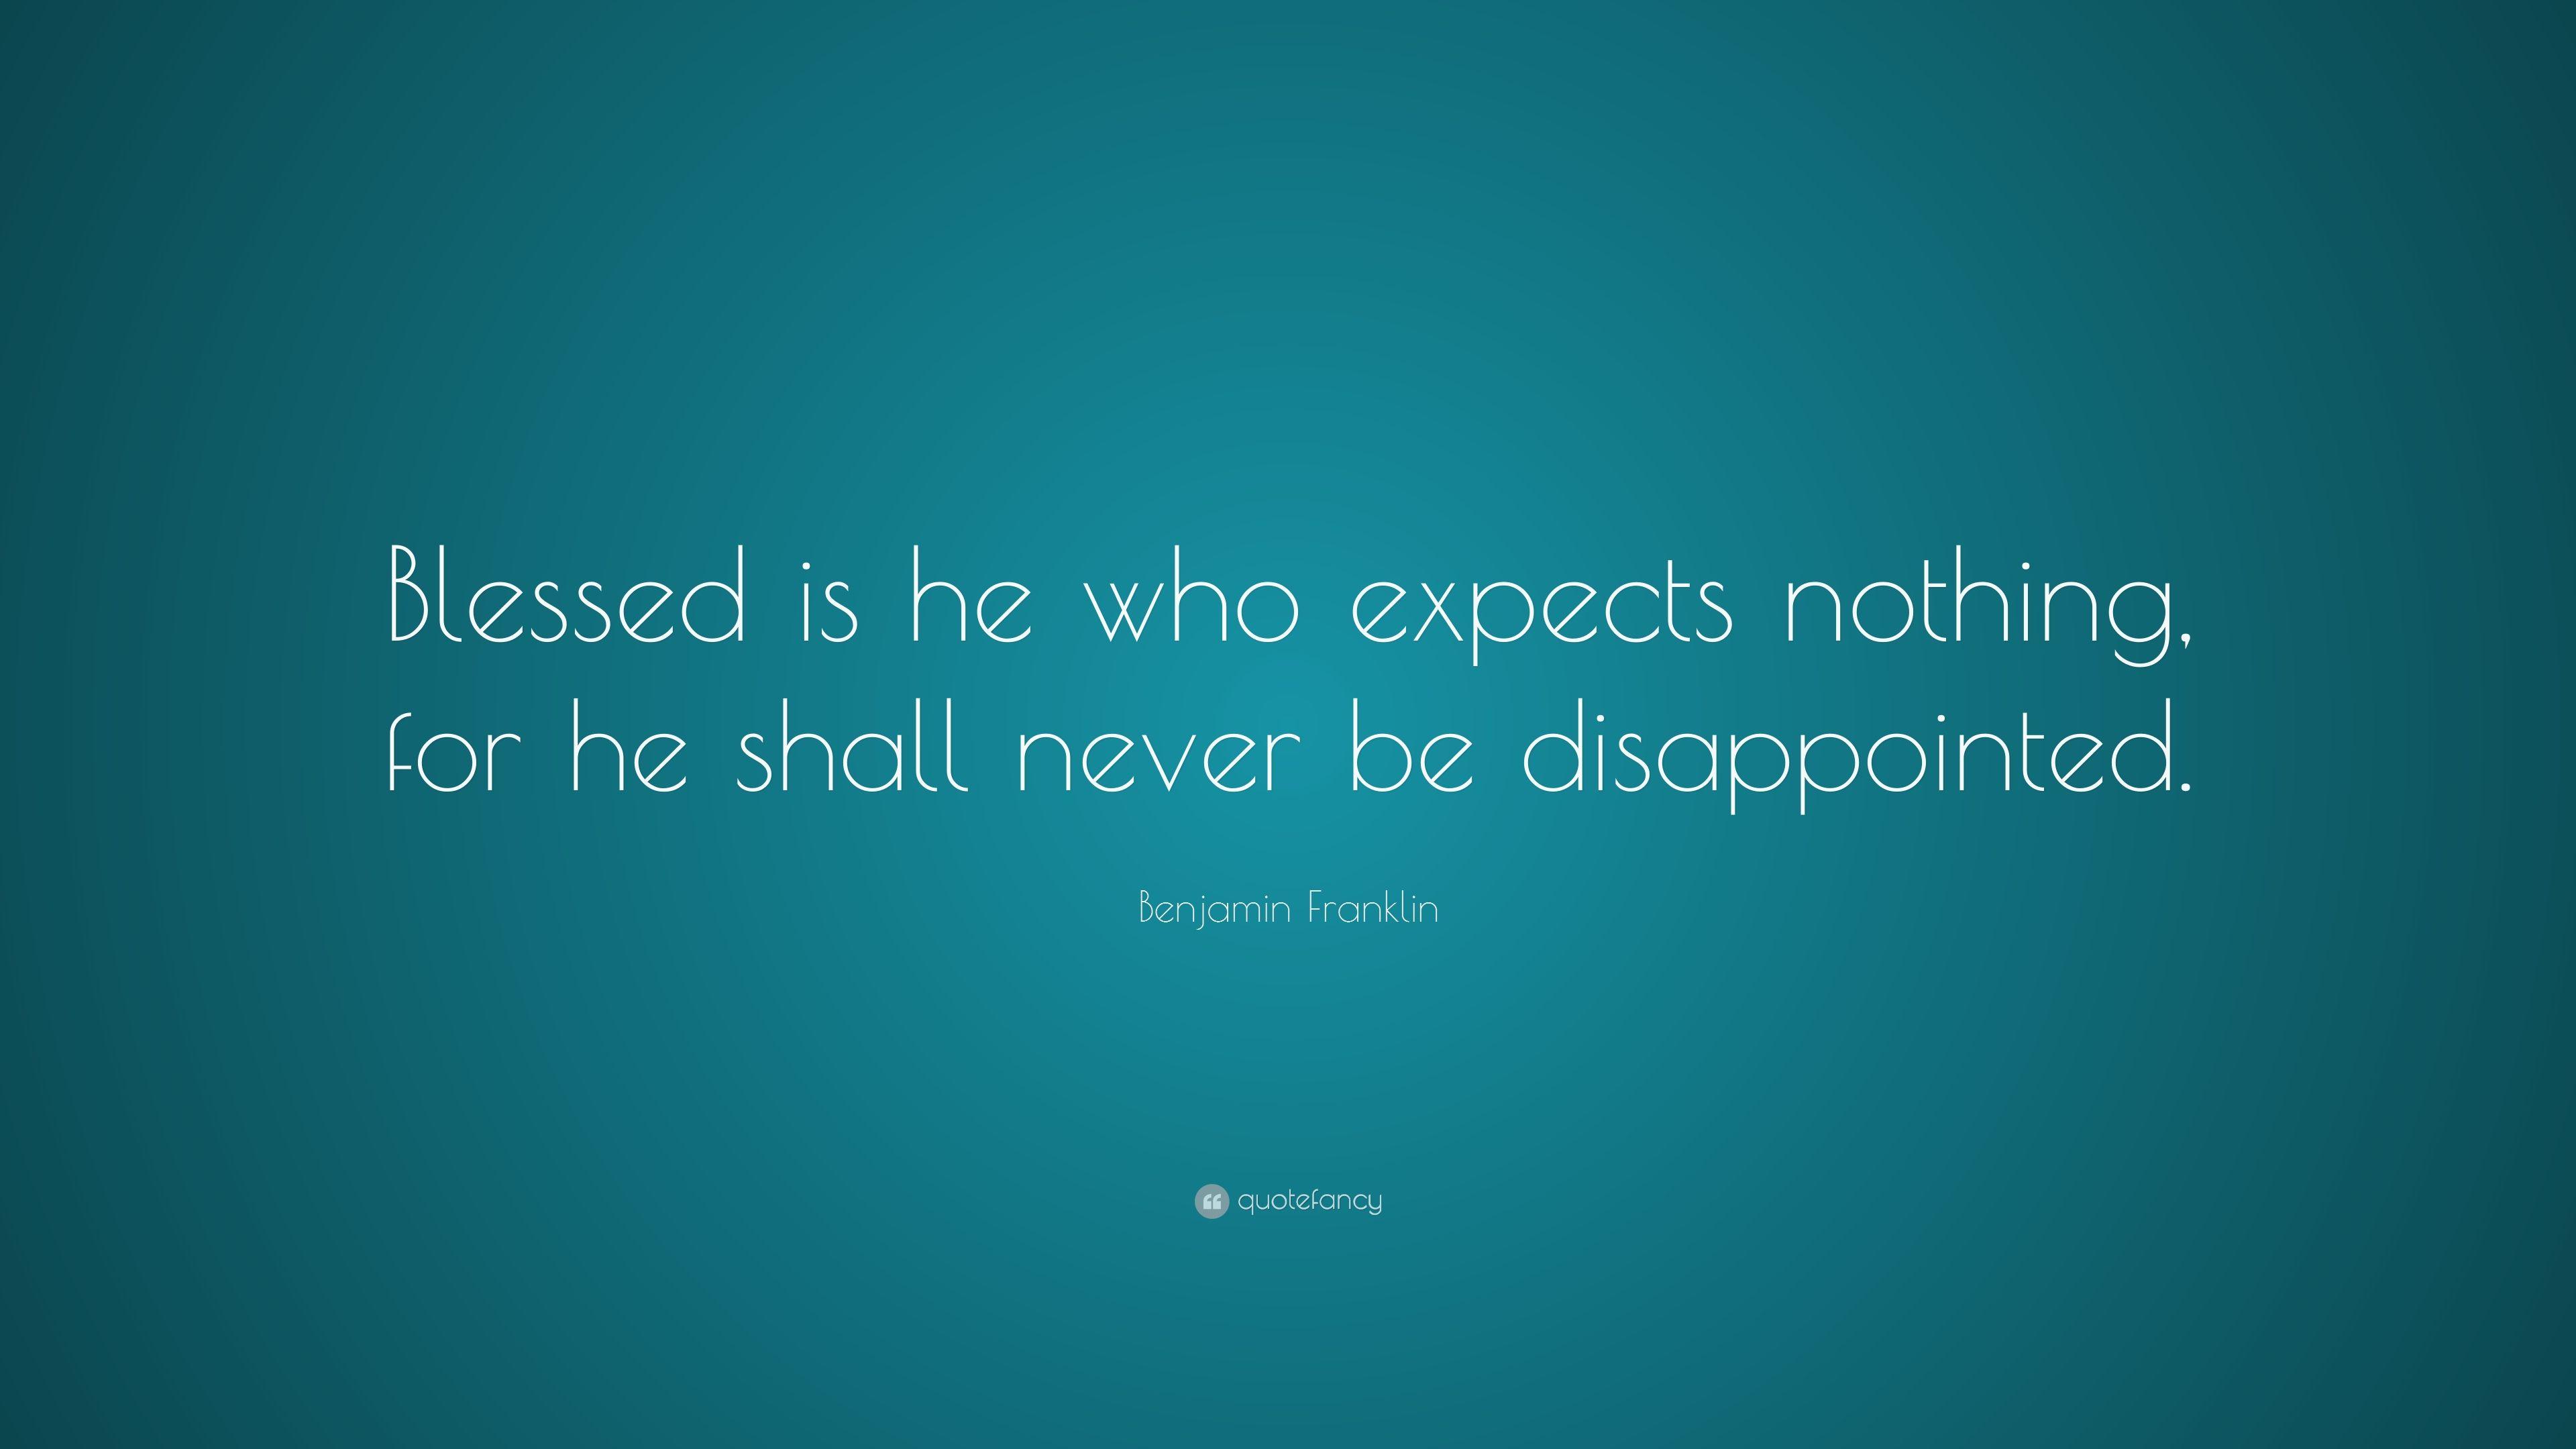 Benjamin Franklin Quote: “Blessed is he who expects nothing